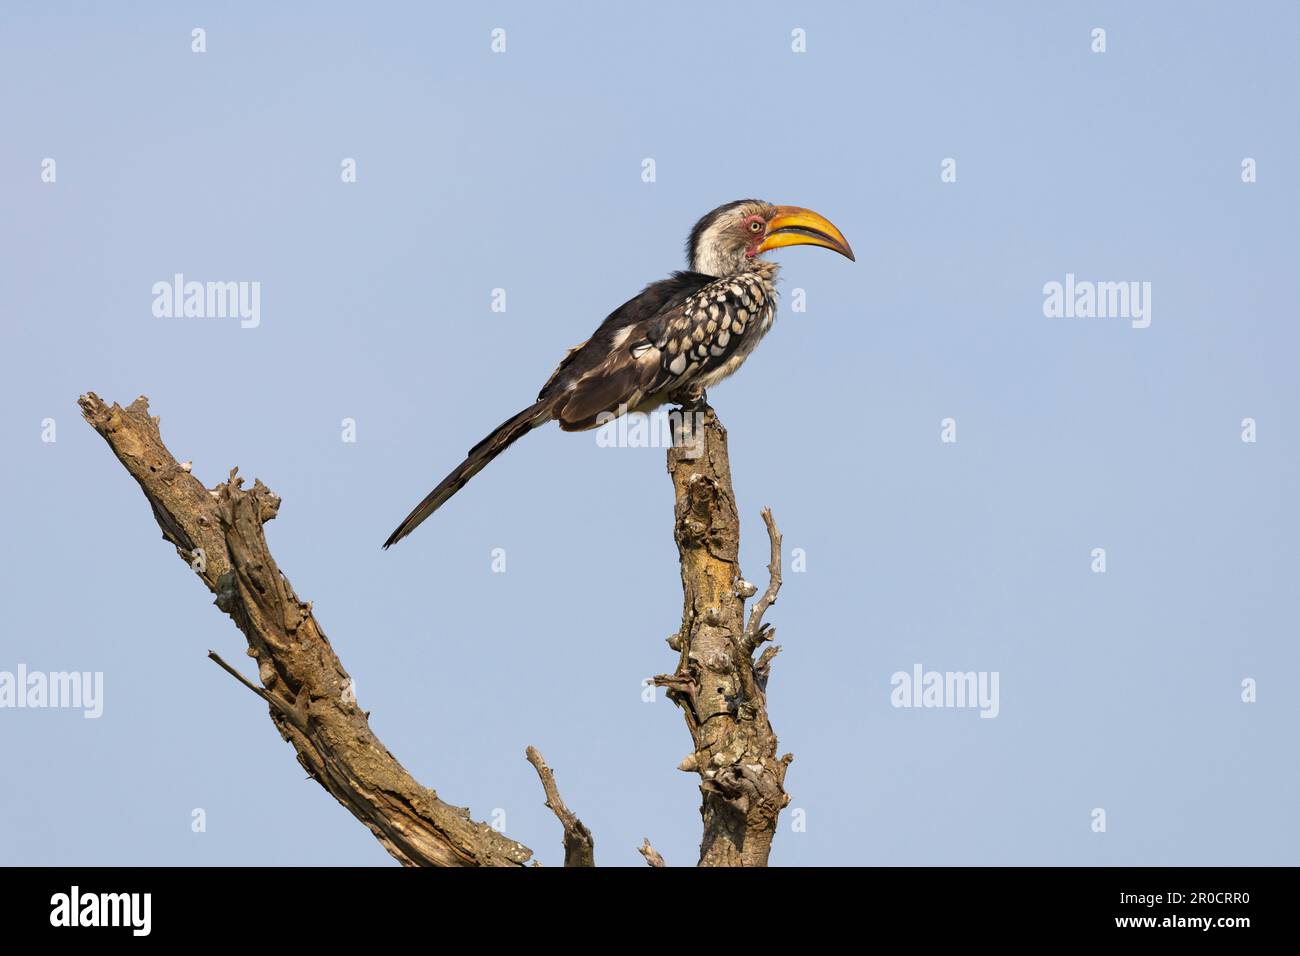 Southern yellow-billed hornbill (Tockus leucomelas), Kruger national park, South Africa Stock Photo